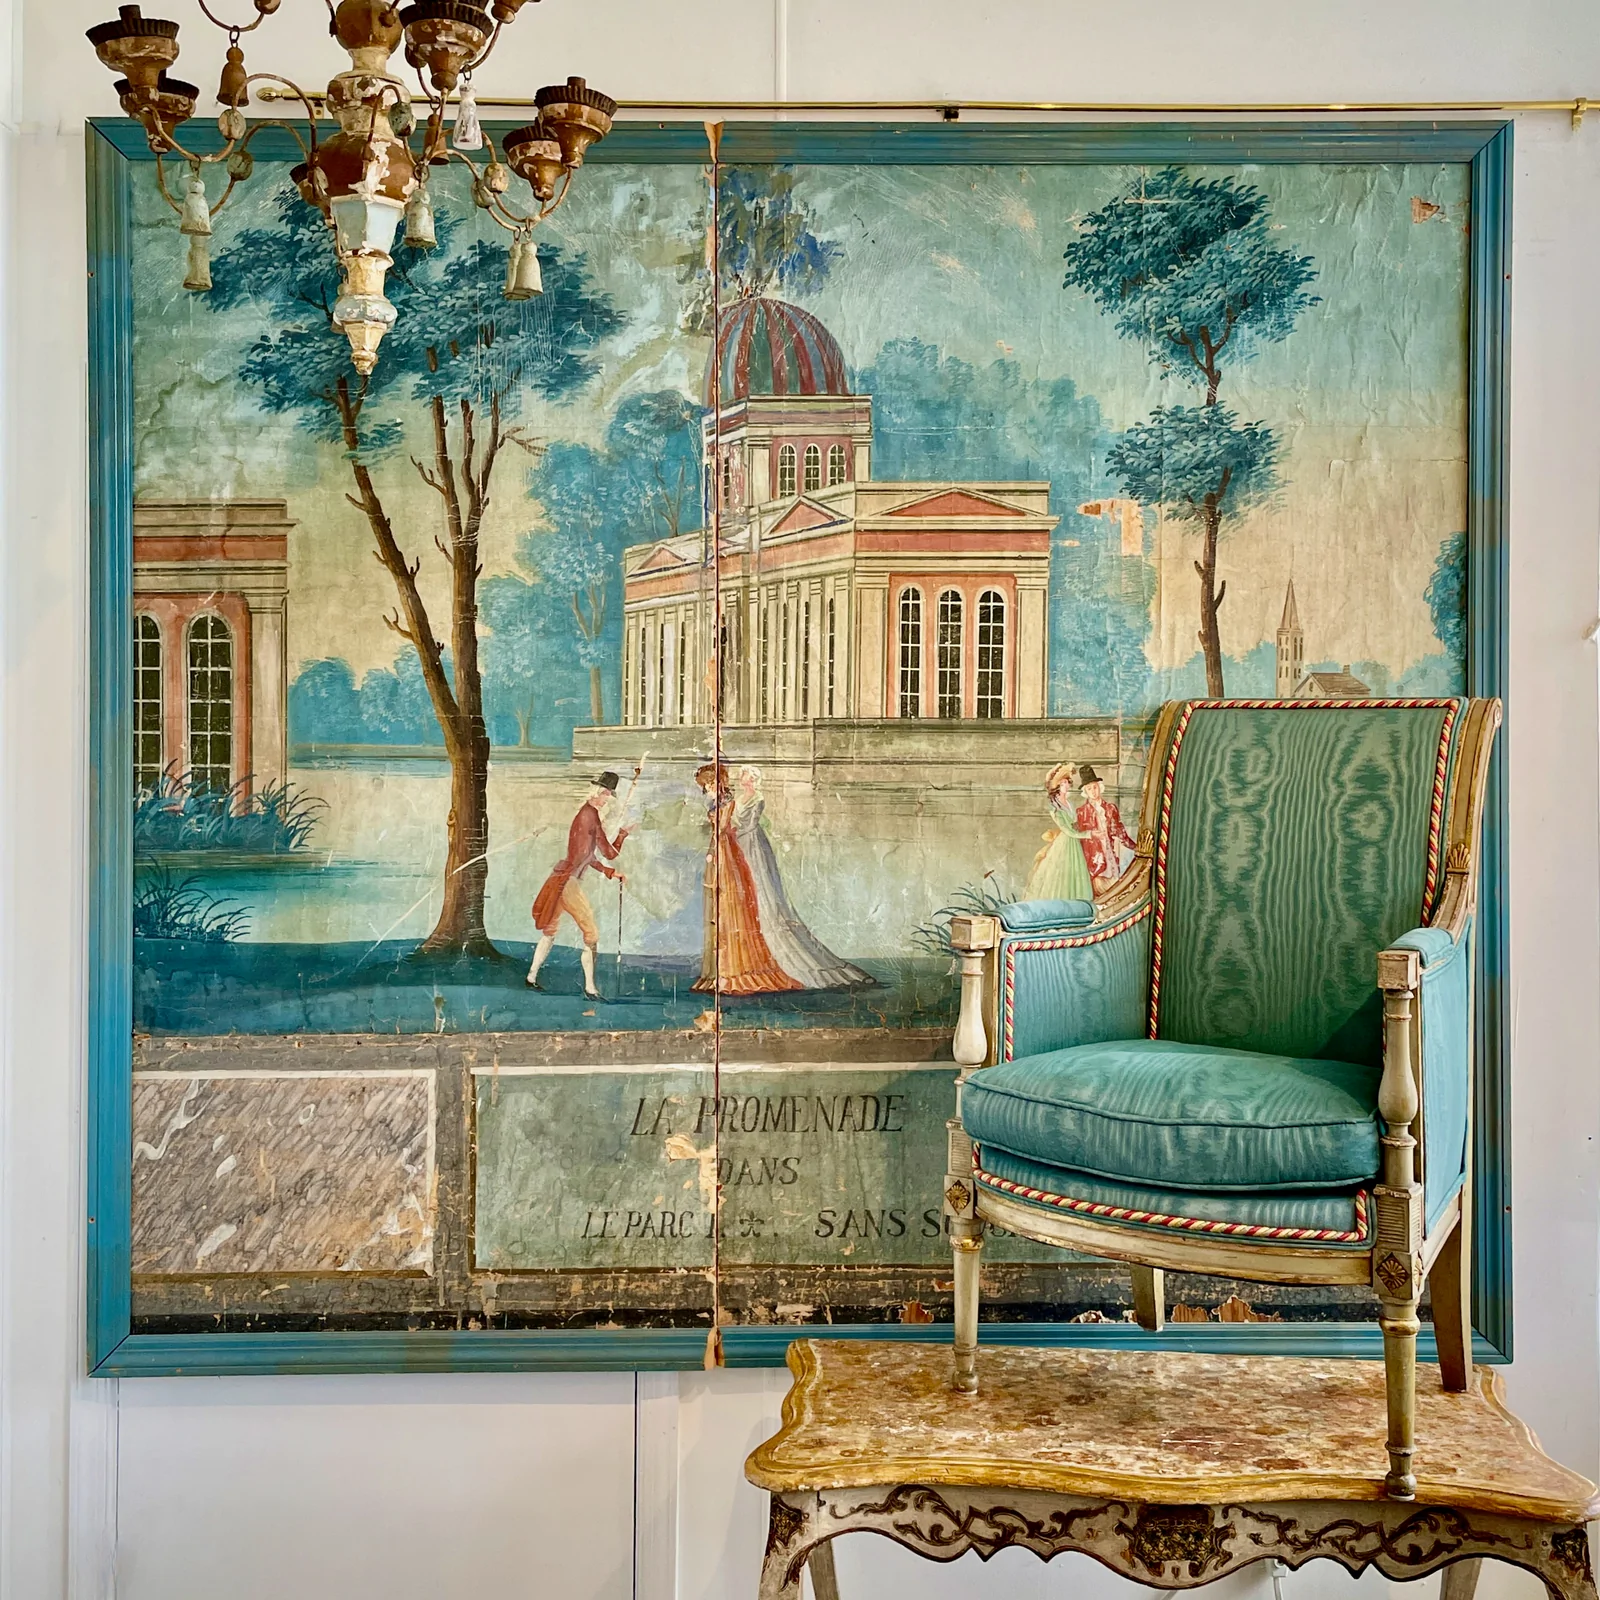 Why Would People Look For Antique Paintings To Buy Today?